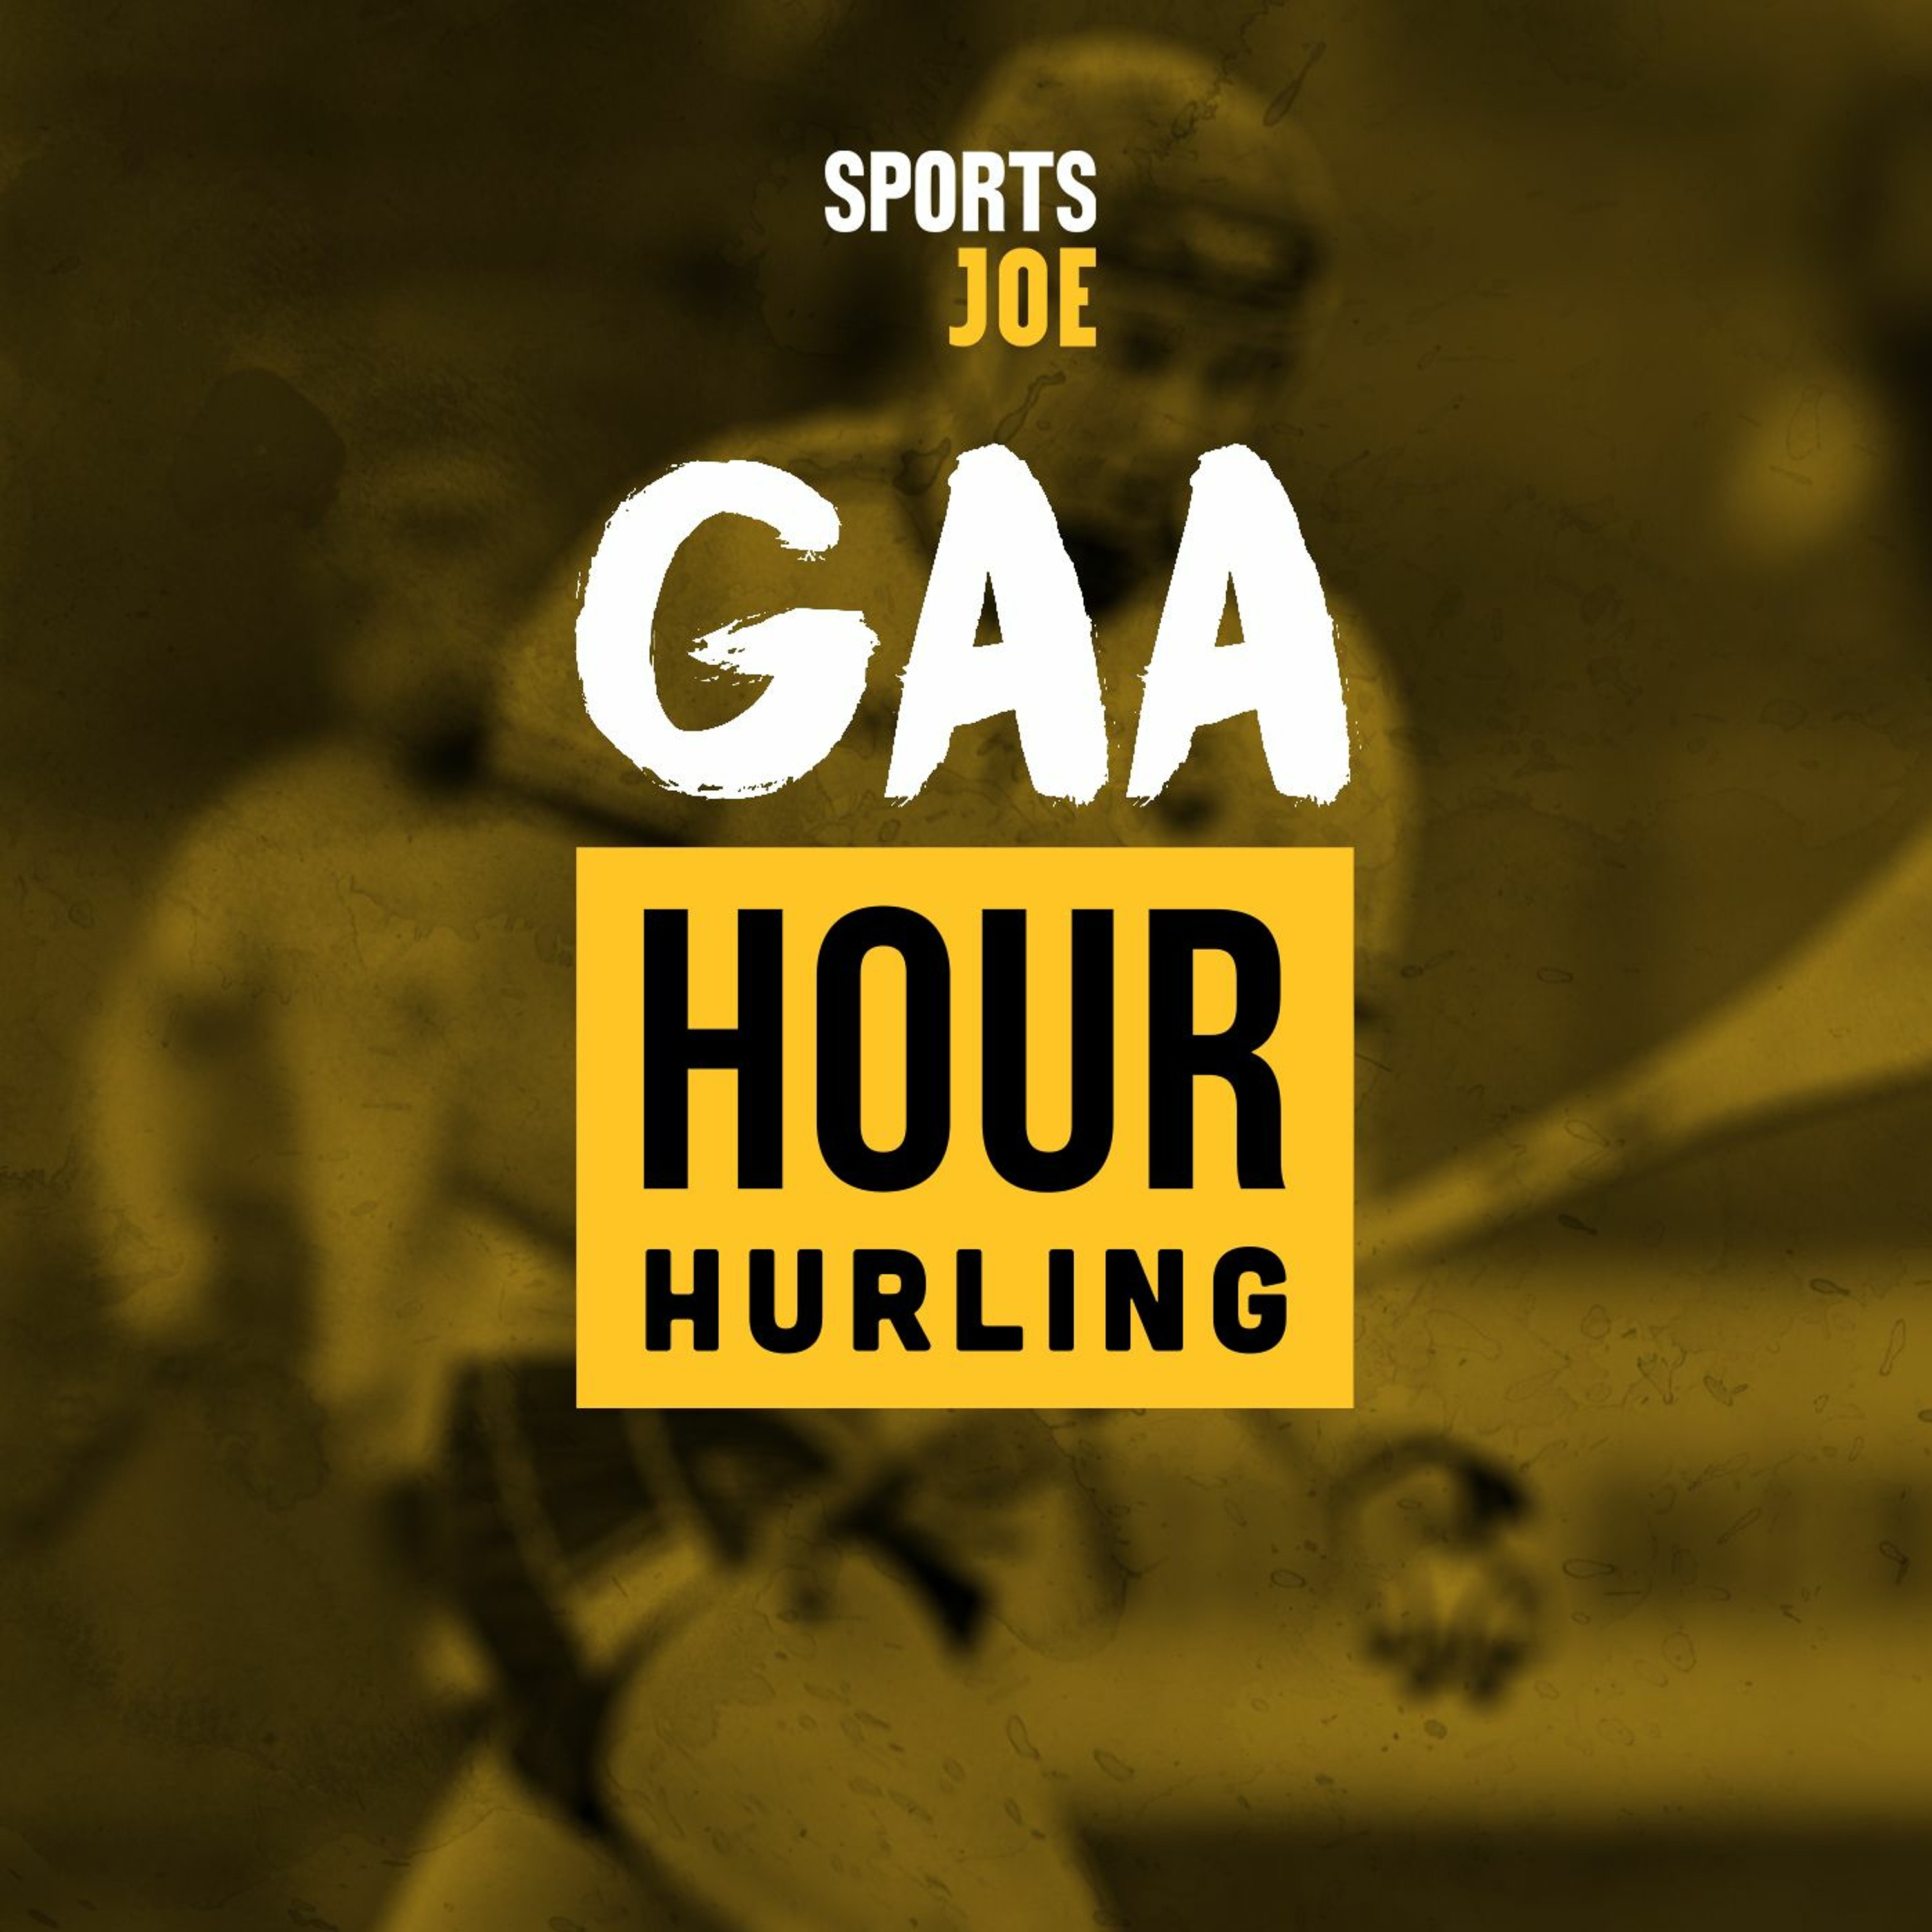 Cian Lynch stats, Lohan appointed & GAA Hour All Stars